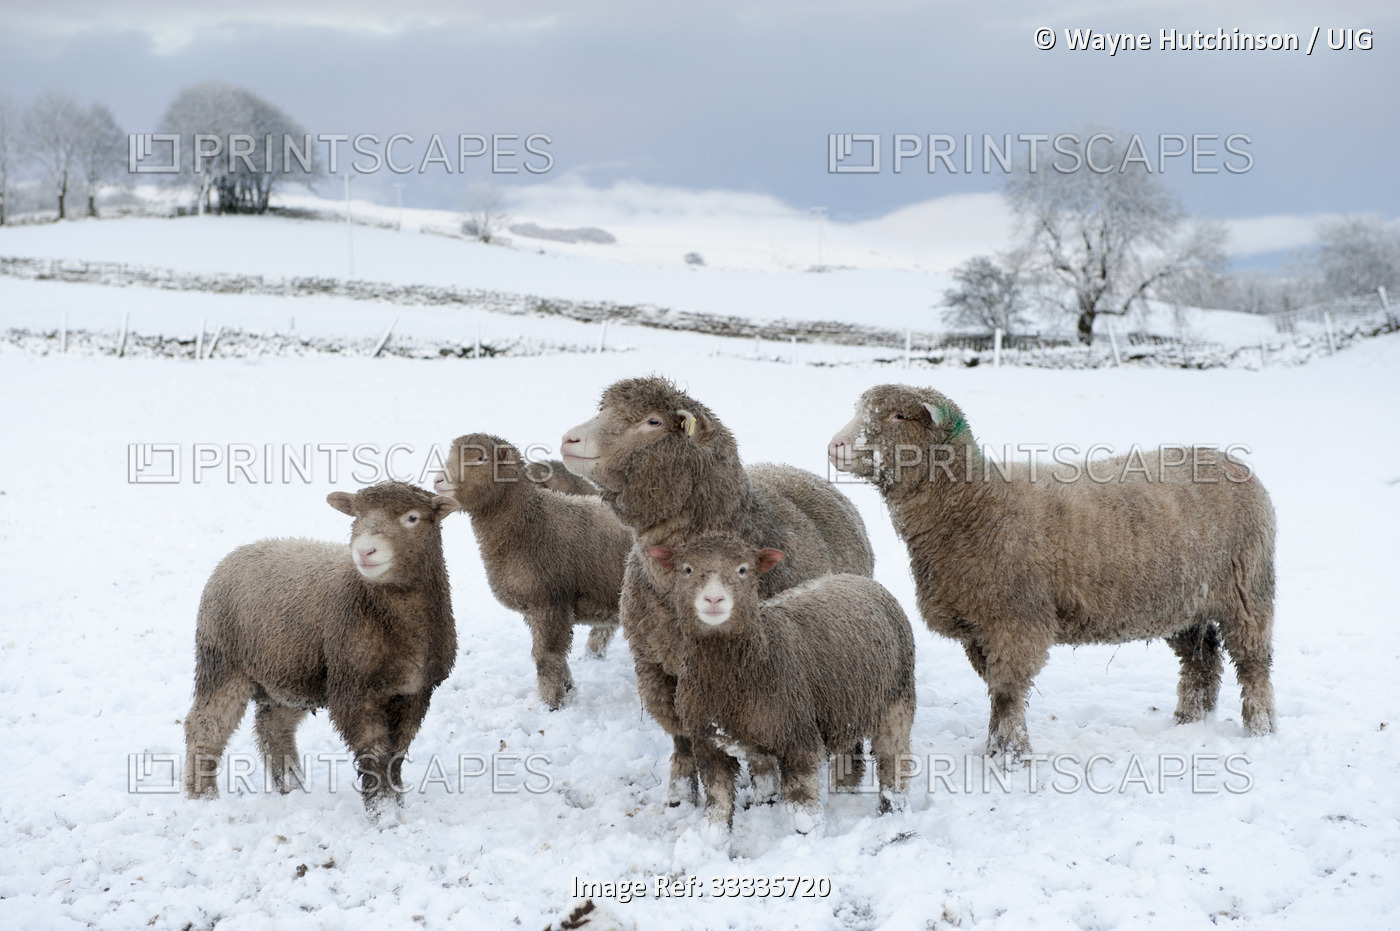 Poll Dorset sheep and their lambs braving the winter conditions, Wensleydale, UK